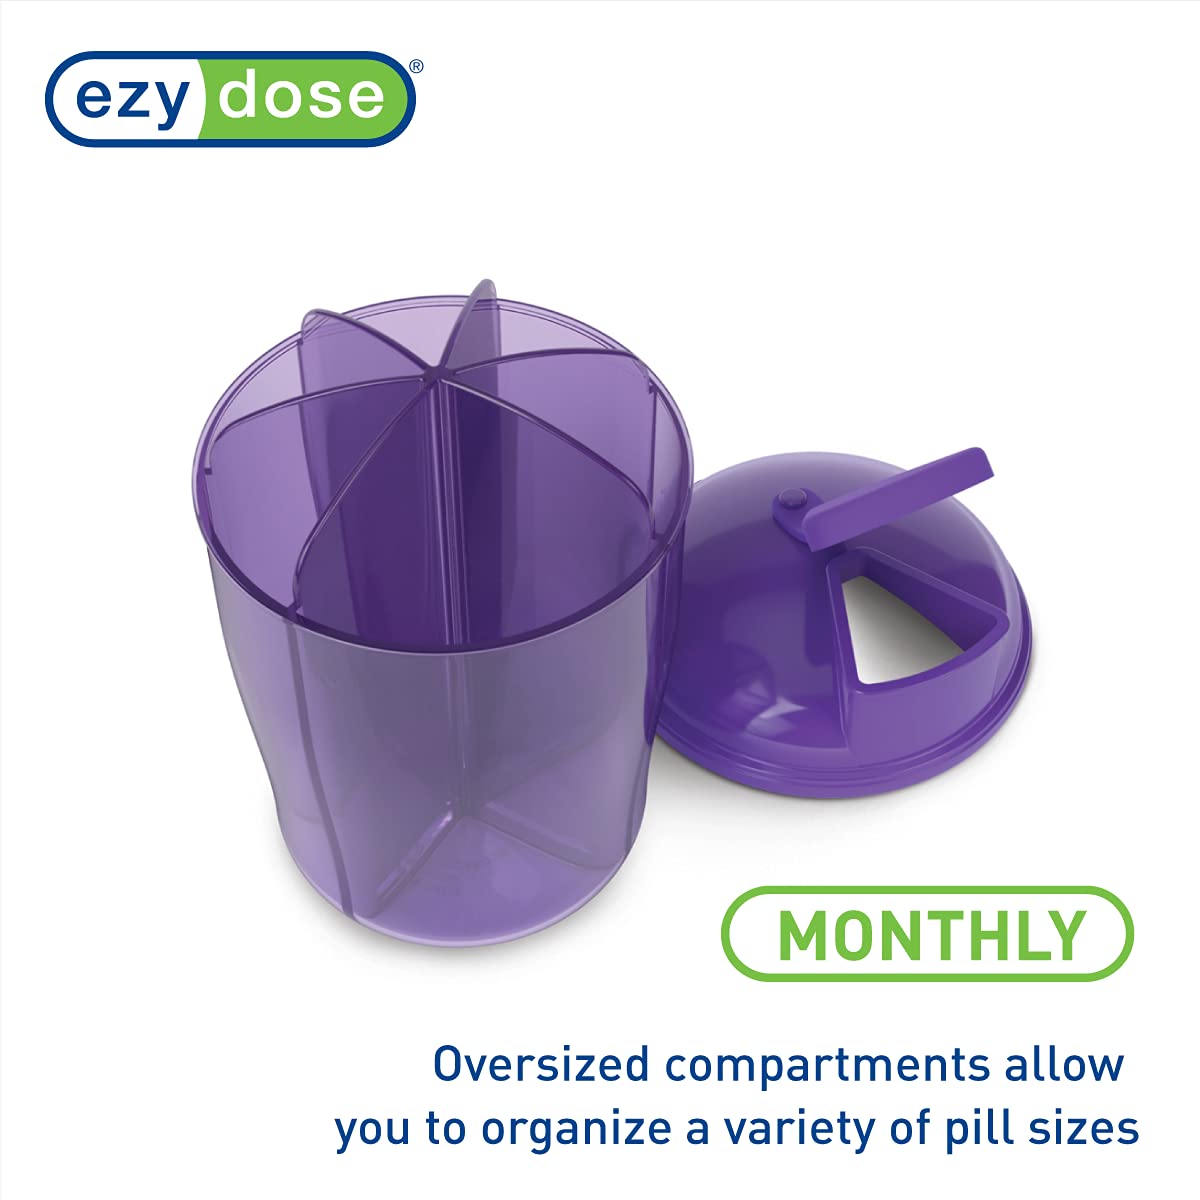 Ezy Dose Vitamin Organizer, 6 Large Compartments for Monthly, 30-Day Storage, Colors may vary